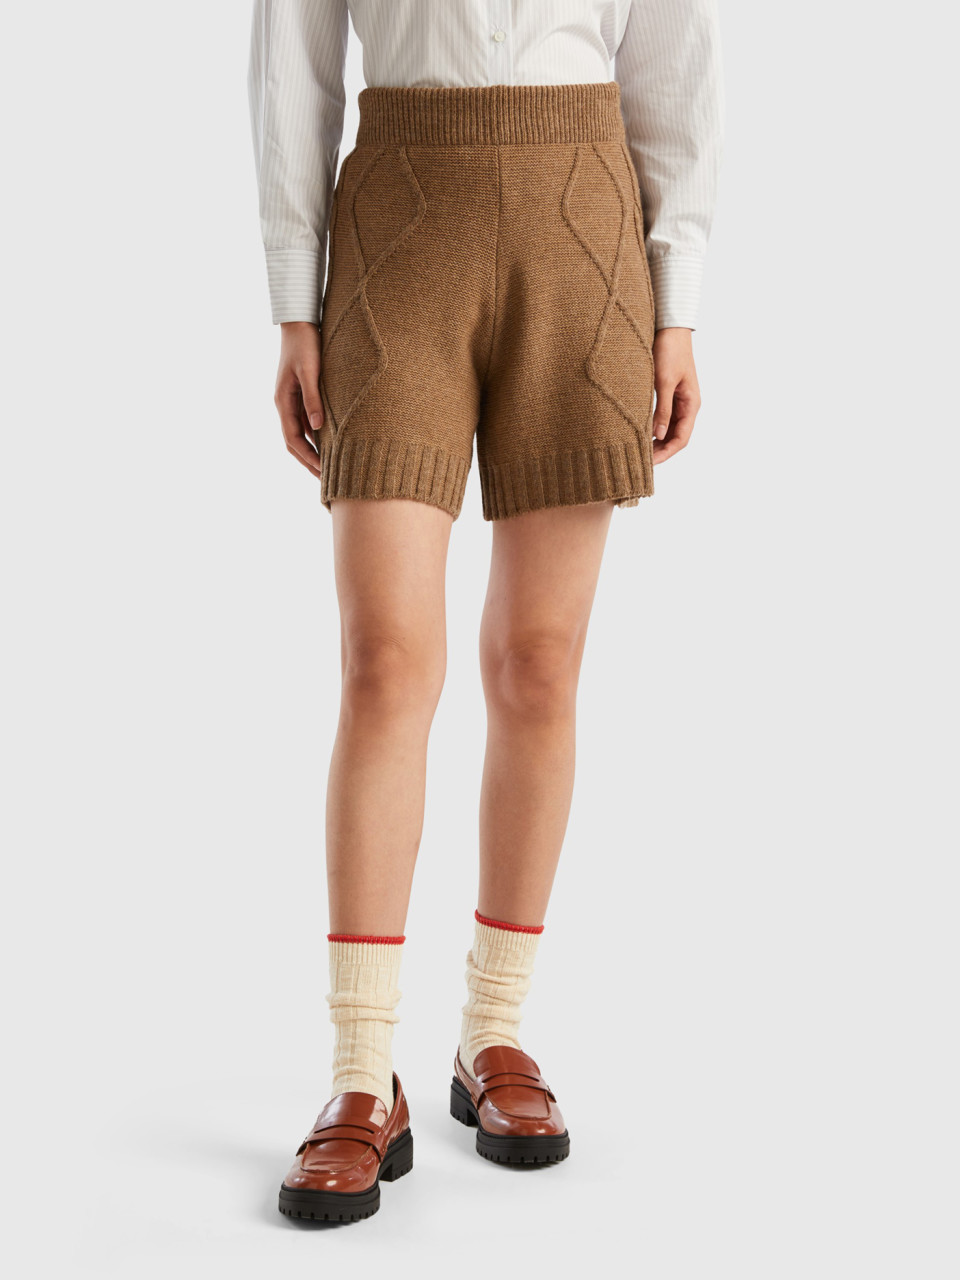 Benetton, Knit Bermudas With Cables And Diamond Pattern, Camel, Women